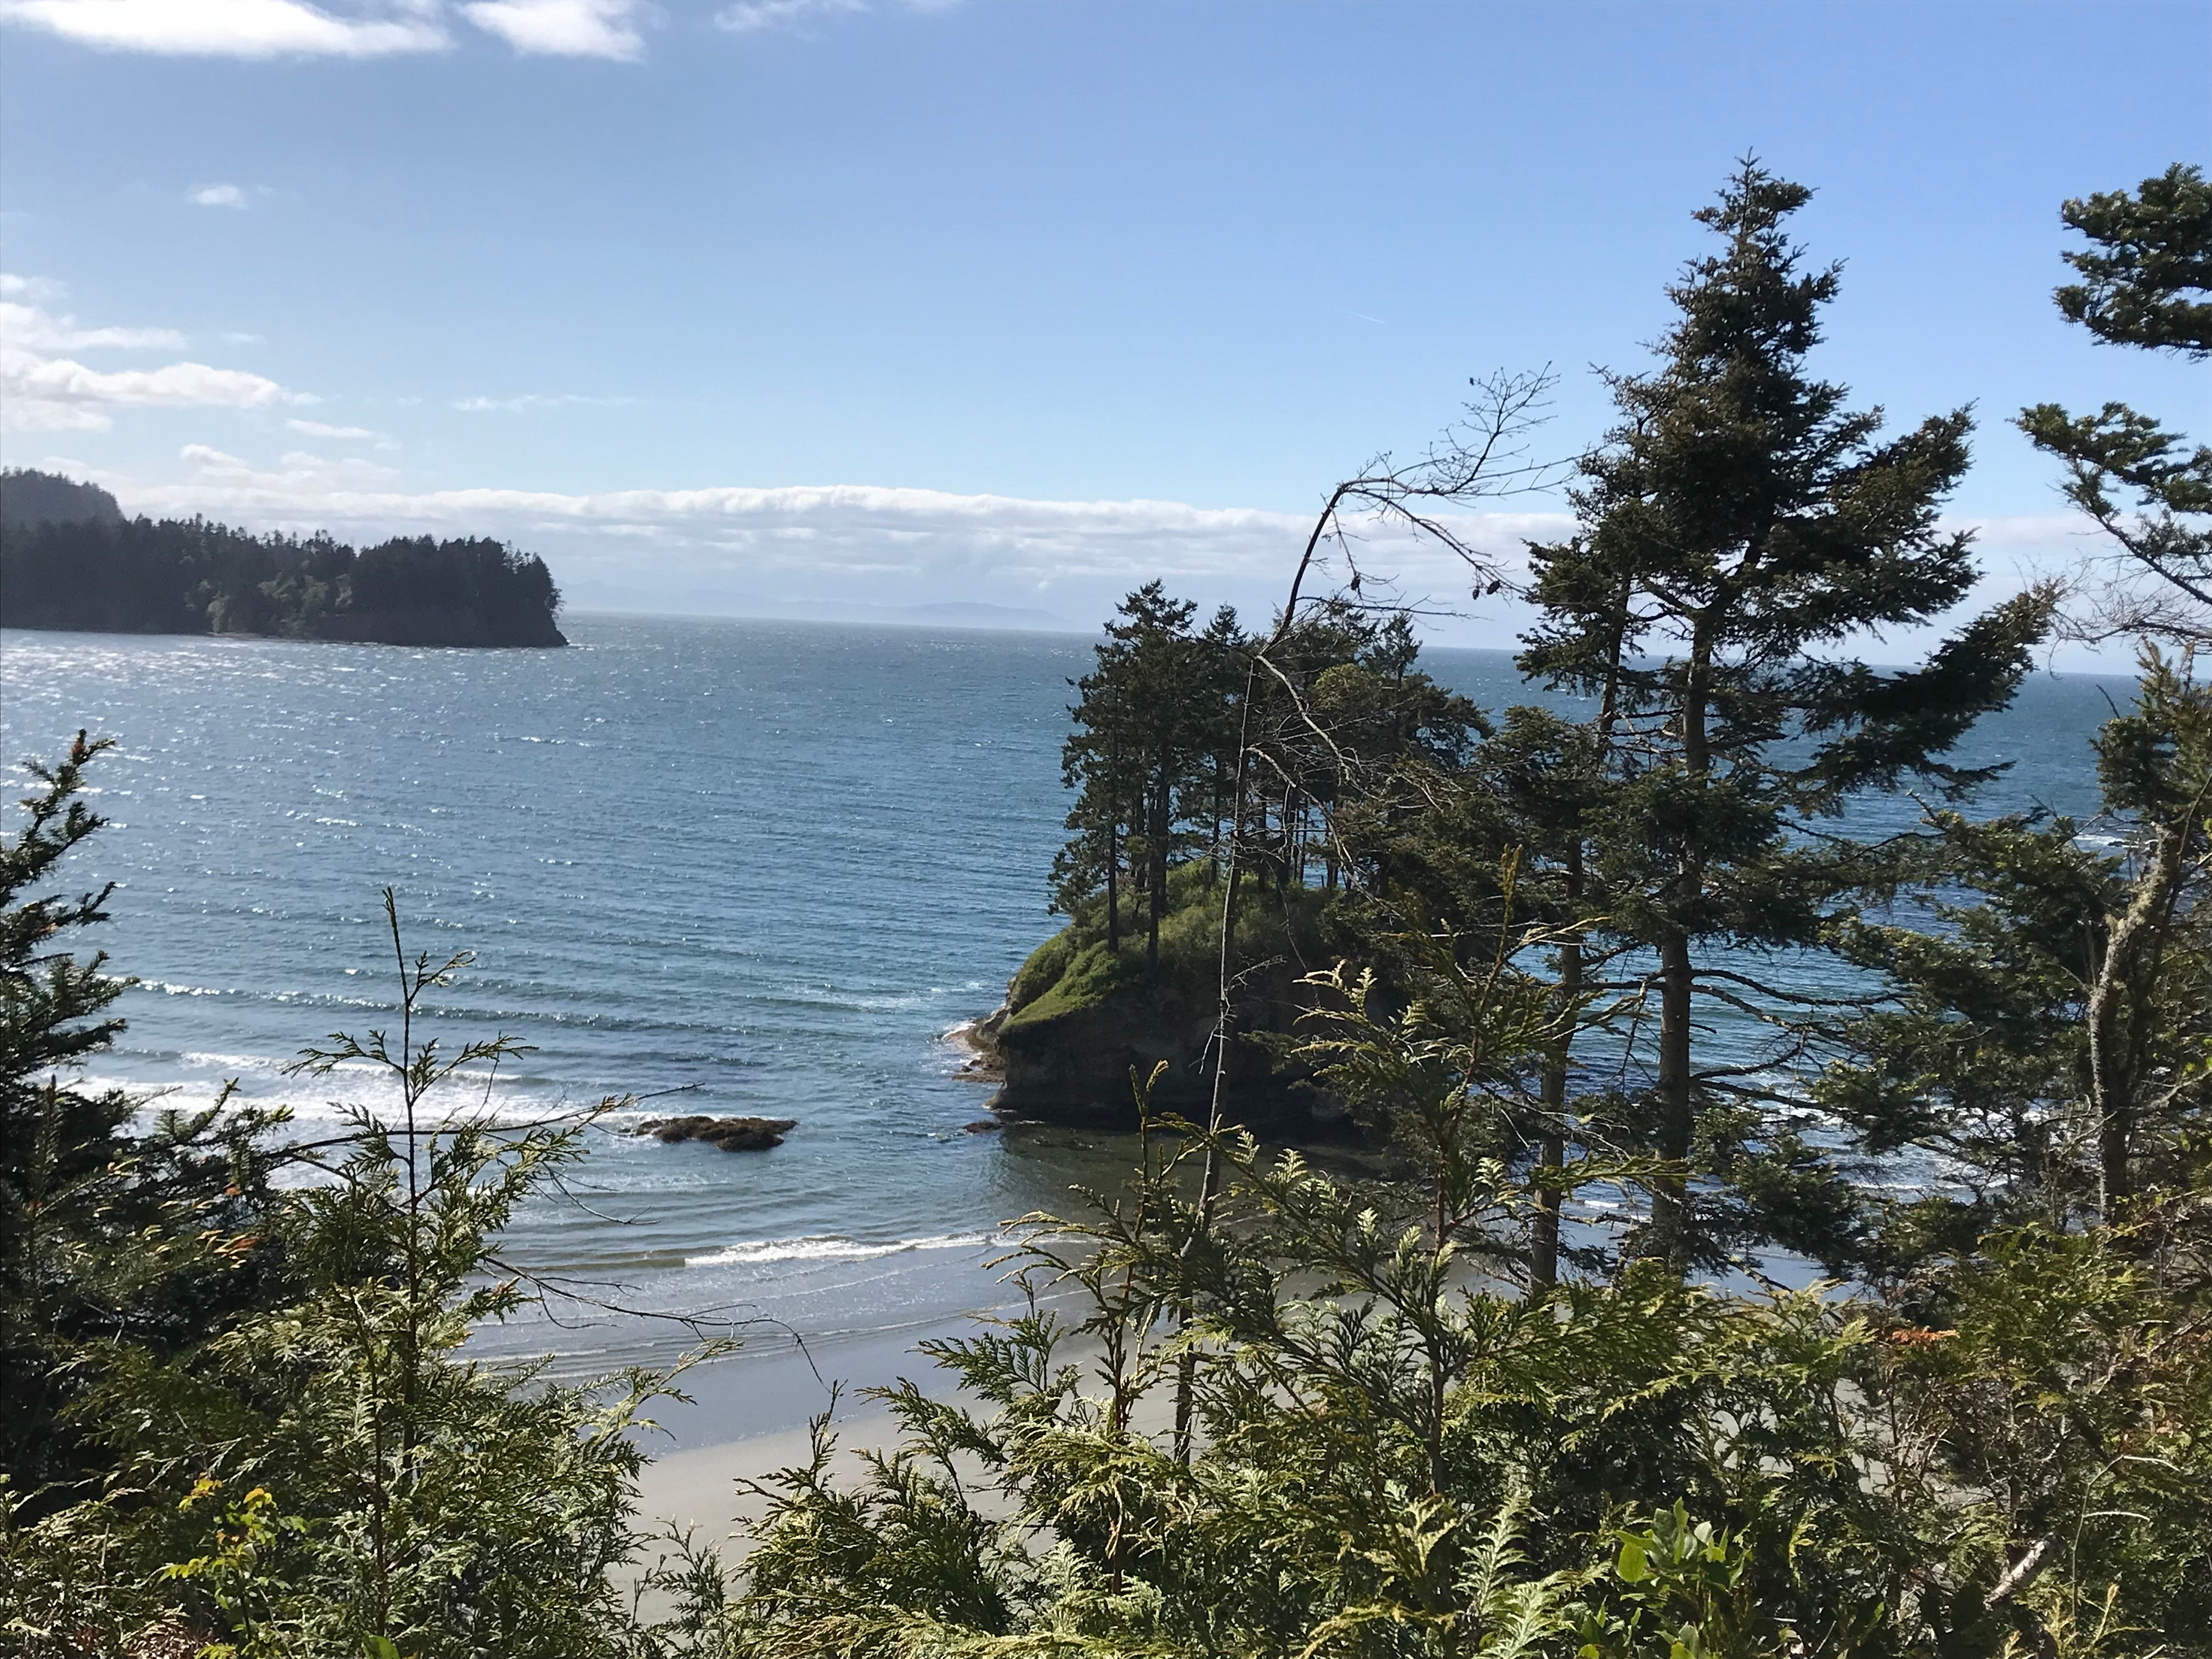 View from short campground trail bluff hike overlooking Crescent Bay.